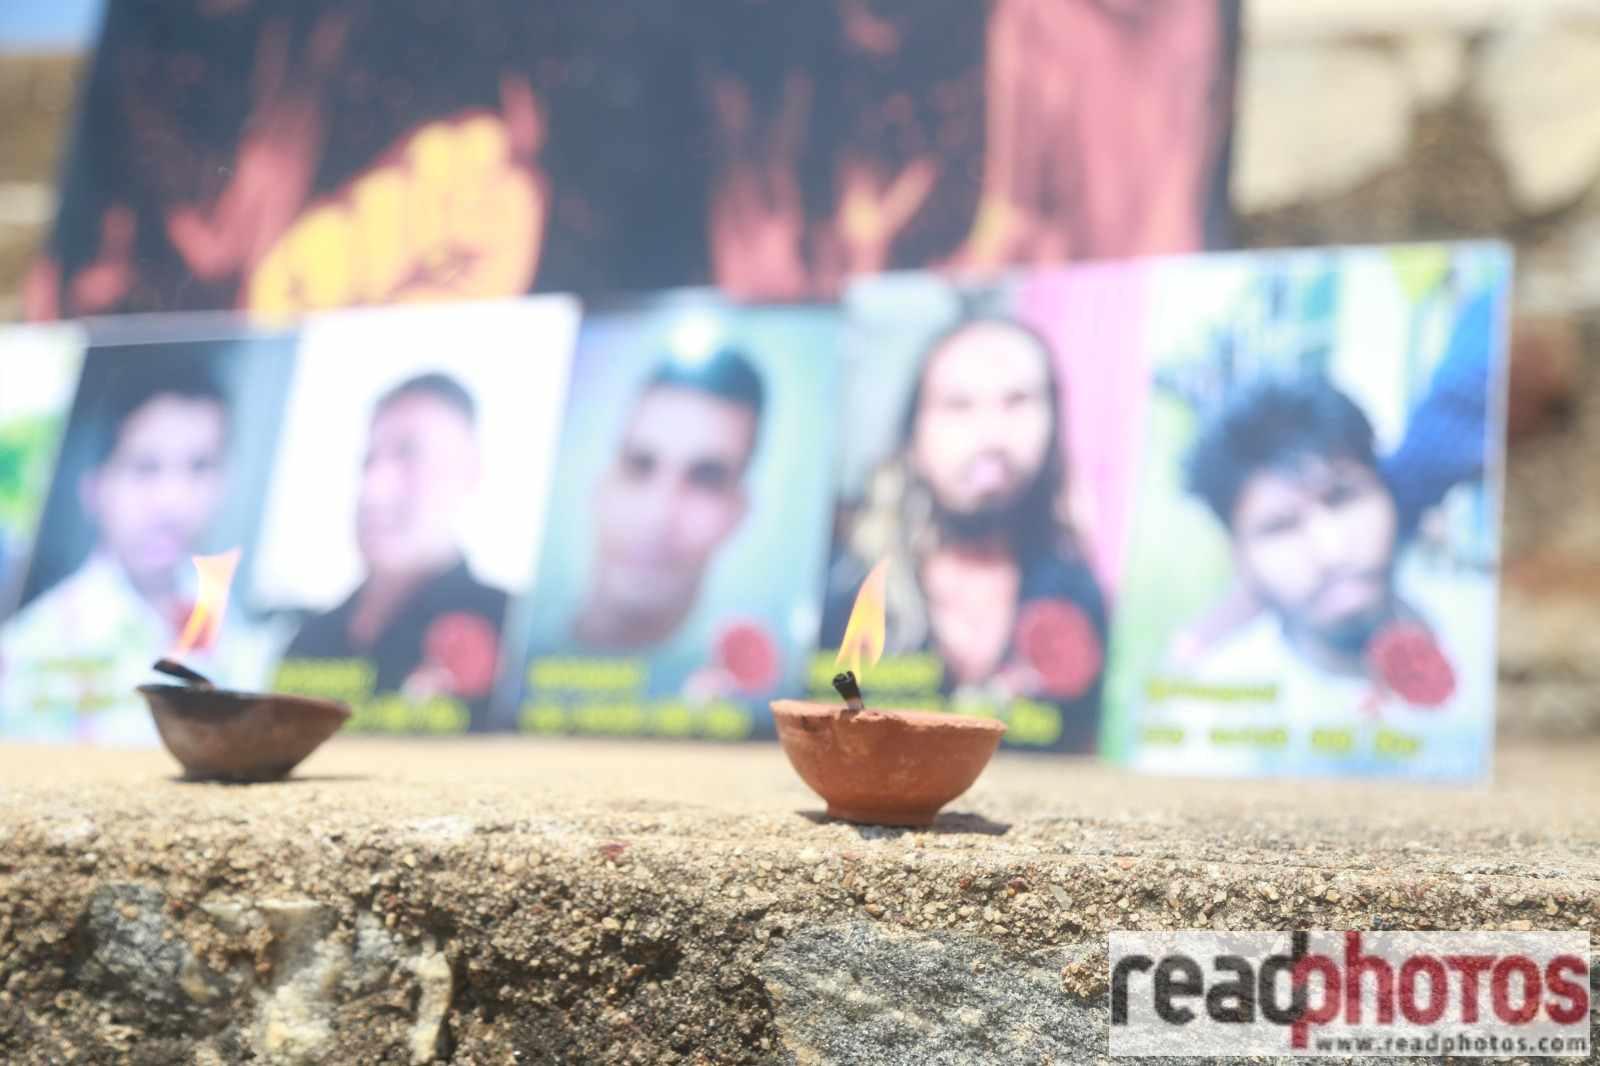 Lives lost in SL war remembered at Galle Face - Read Photos